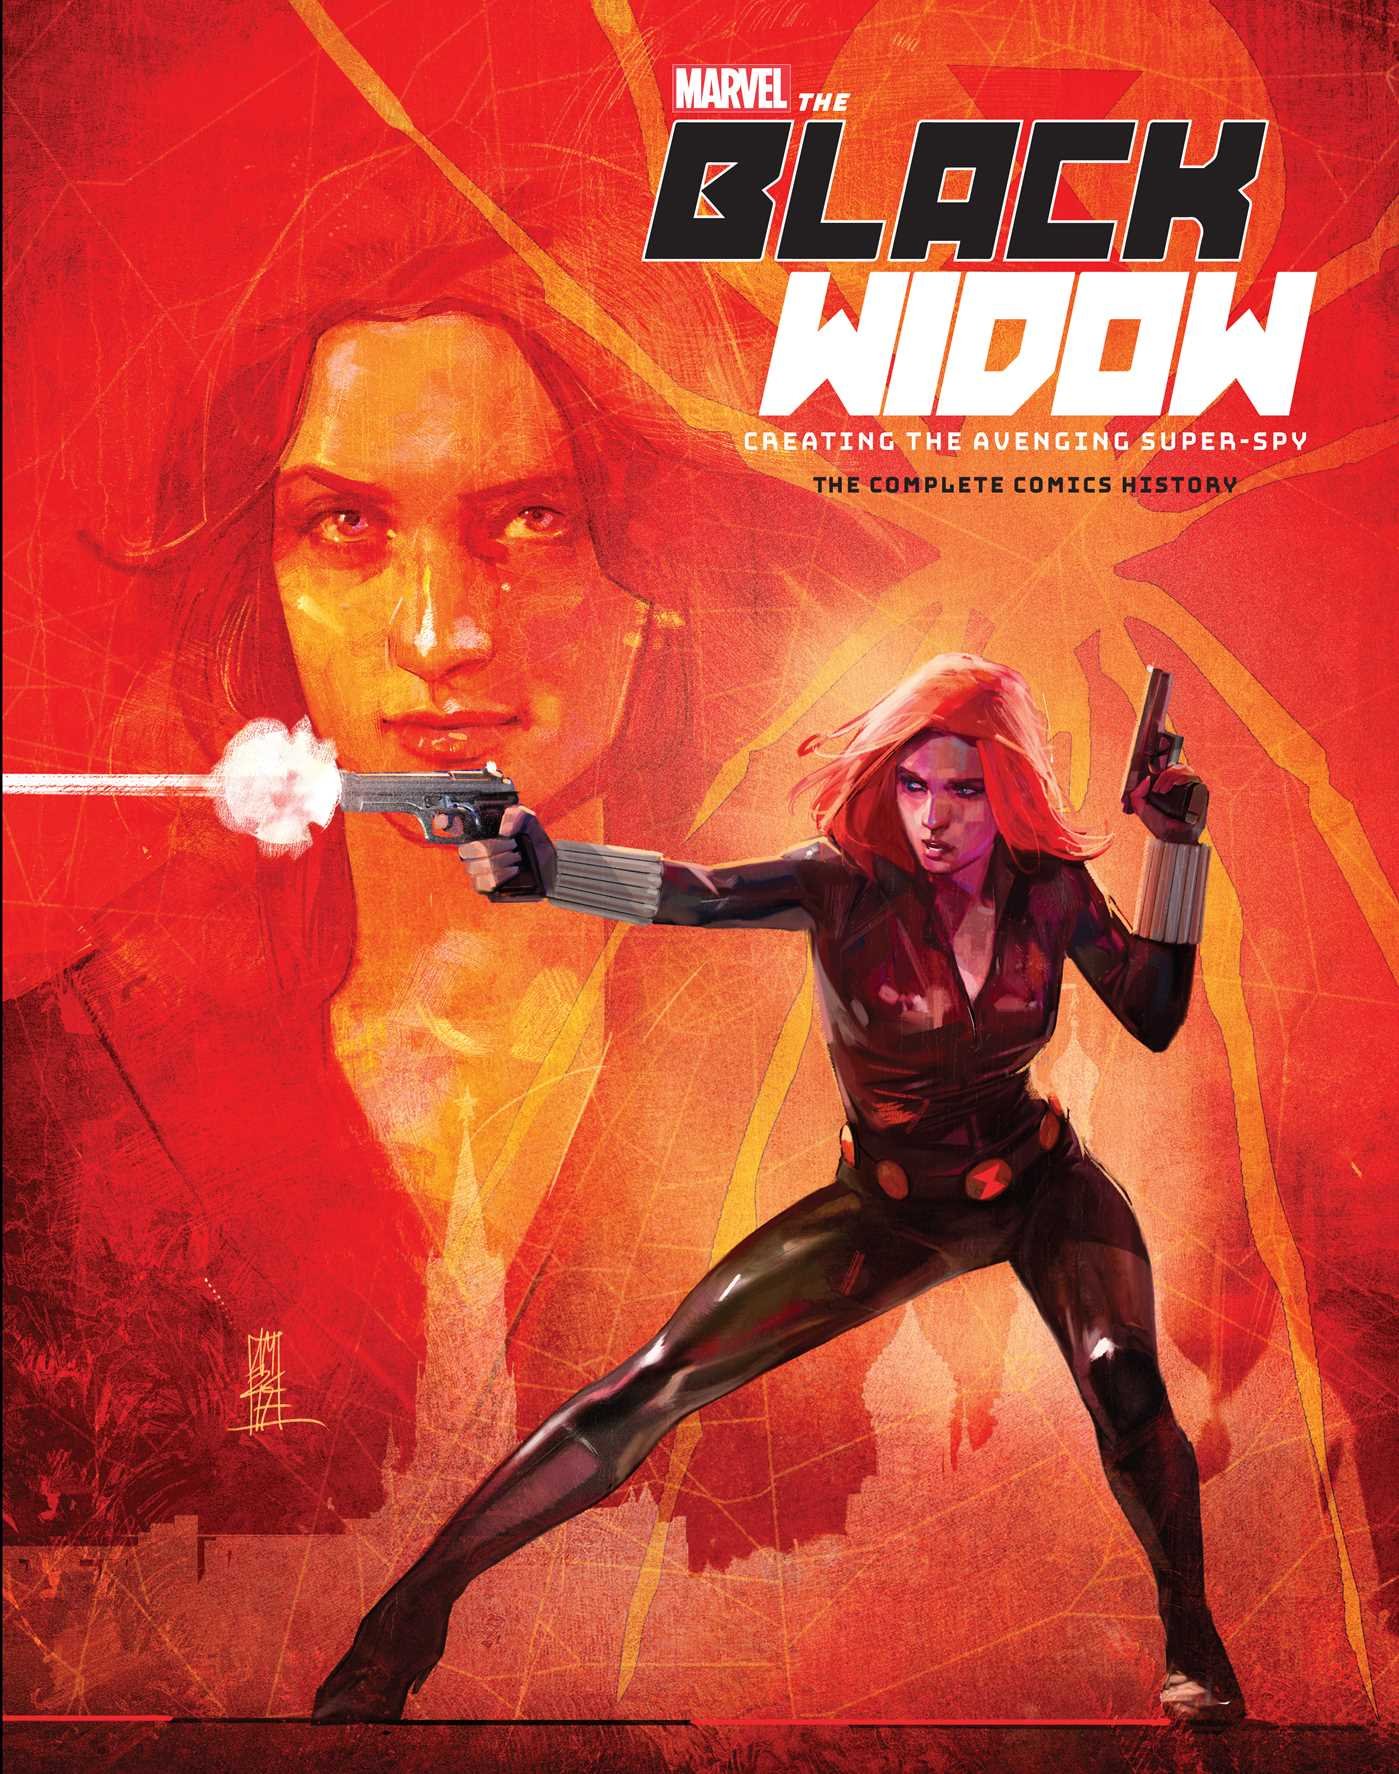 Marvel's The Black Widow: Creating the Avenging Super-Spy: The Complete Comics History